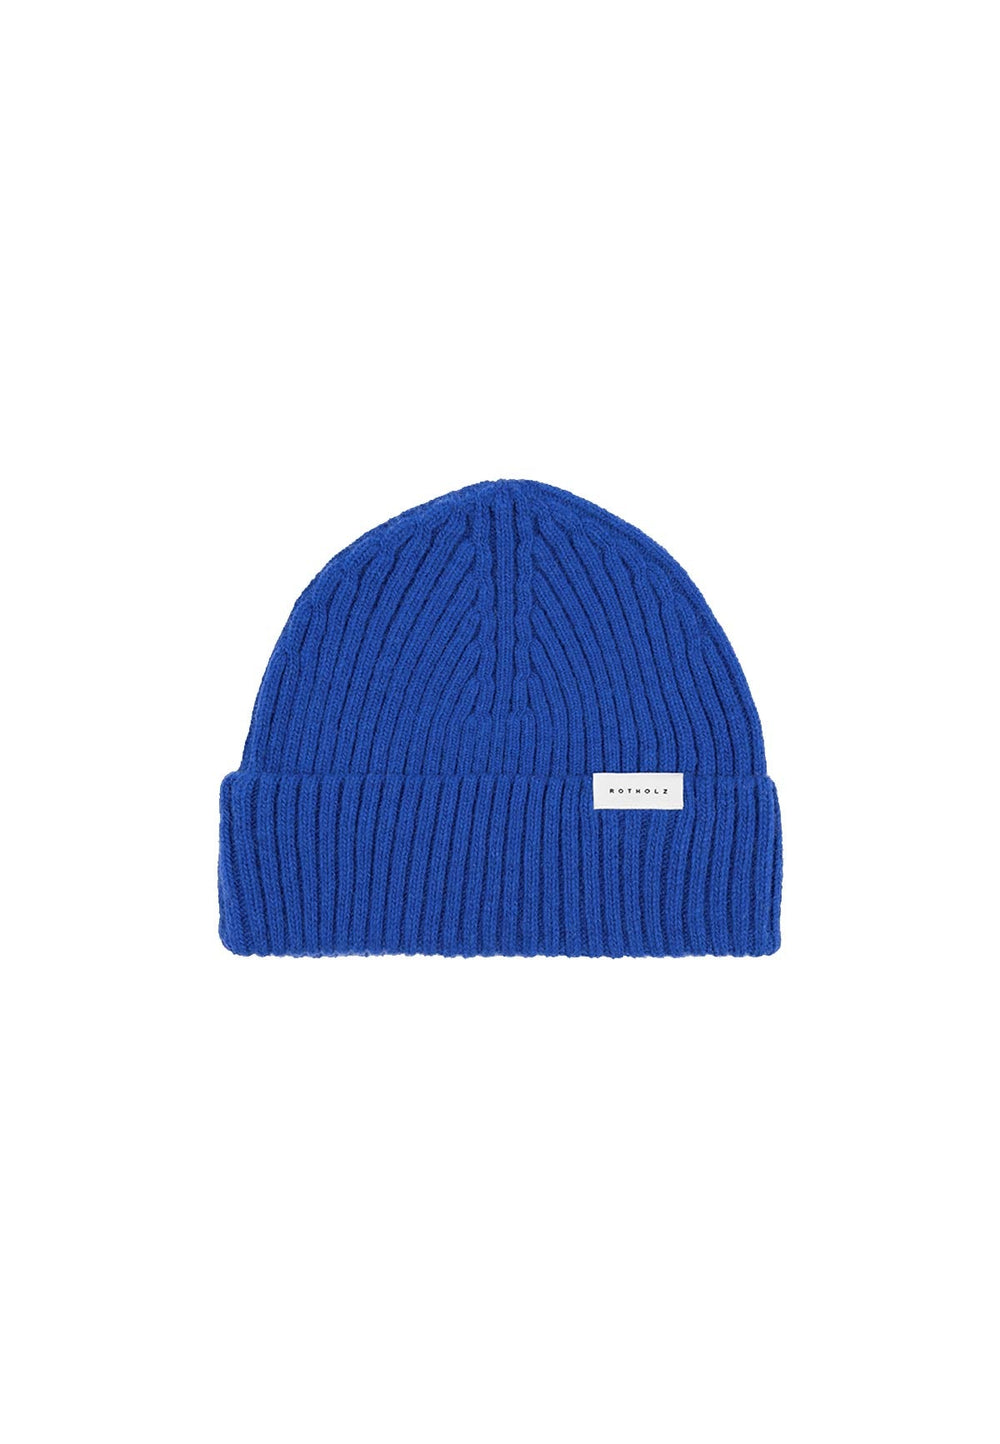 Product photo of a ribbed beanie in cobalt blue.